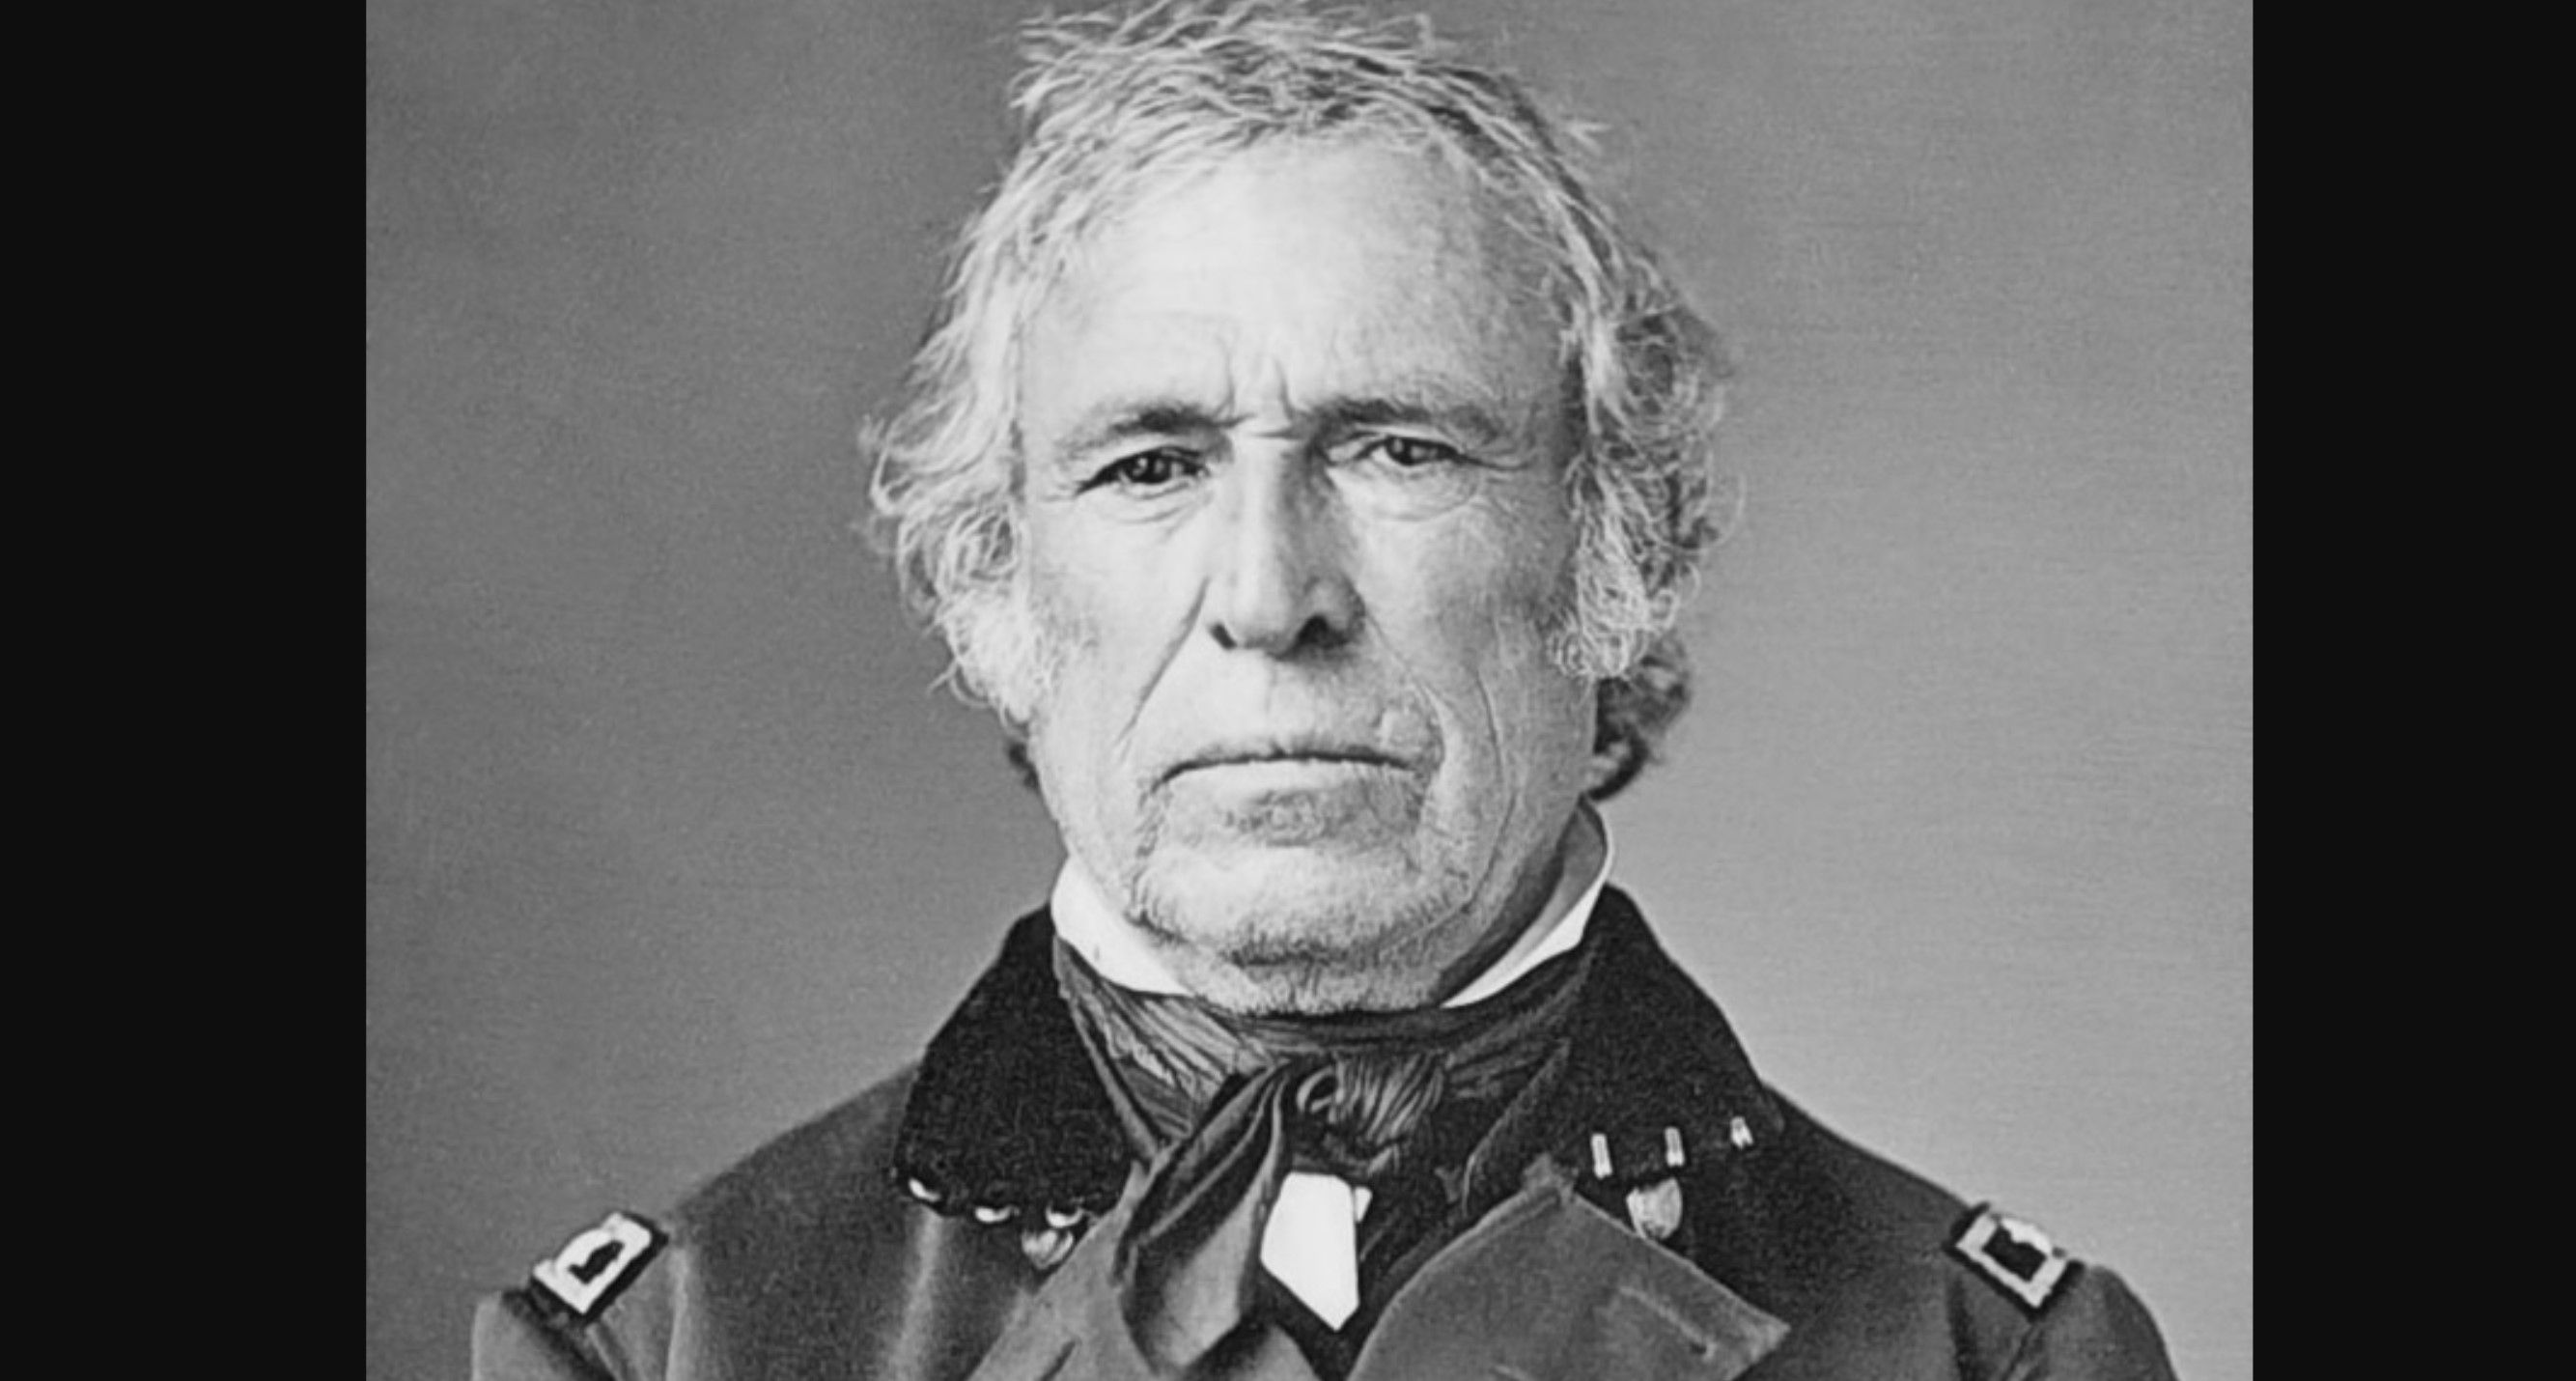 <p><a href="https://www.history.com/this-day-in-history/president-zachary-taylor-dies-unexpectedly">Zachary Taylor </a>died after a July 4 party in 1850. Many reports claim a combination of cherry acid and milk caused him to eventually die on July 9, after suffering from cramps, diarrhea, nausea, and dehydration. His official cause of death was cholera morbus, a bacterial infection found in the small intestine. </p>